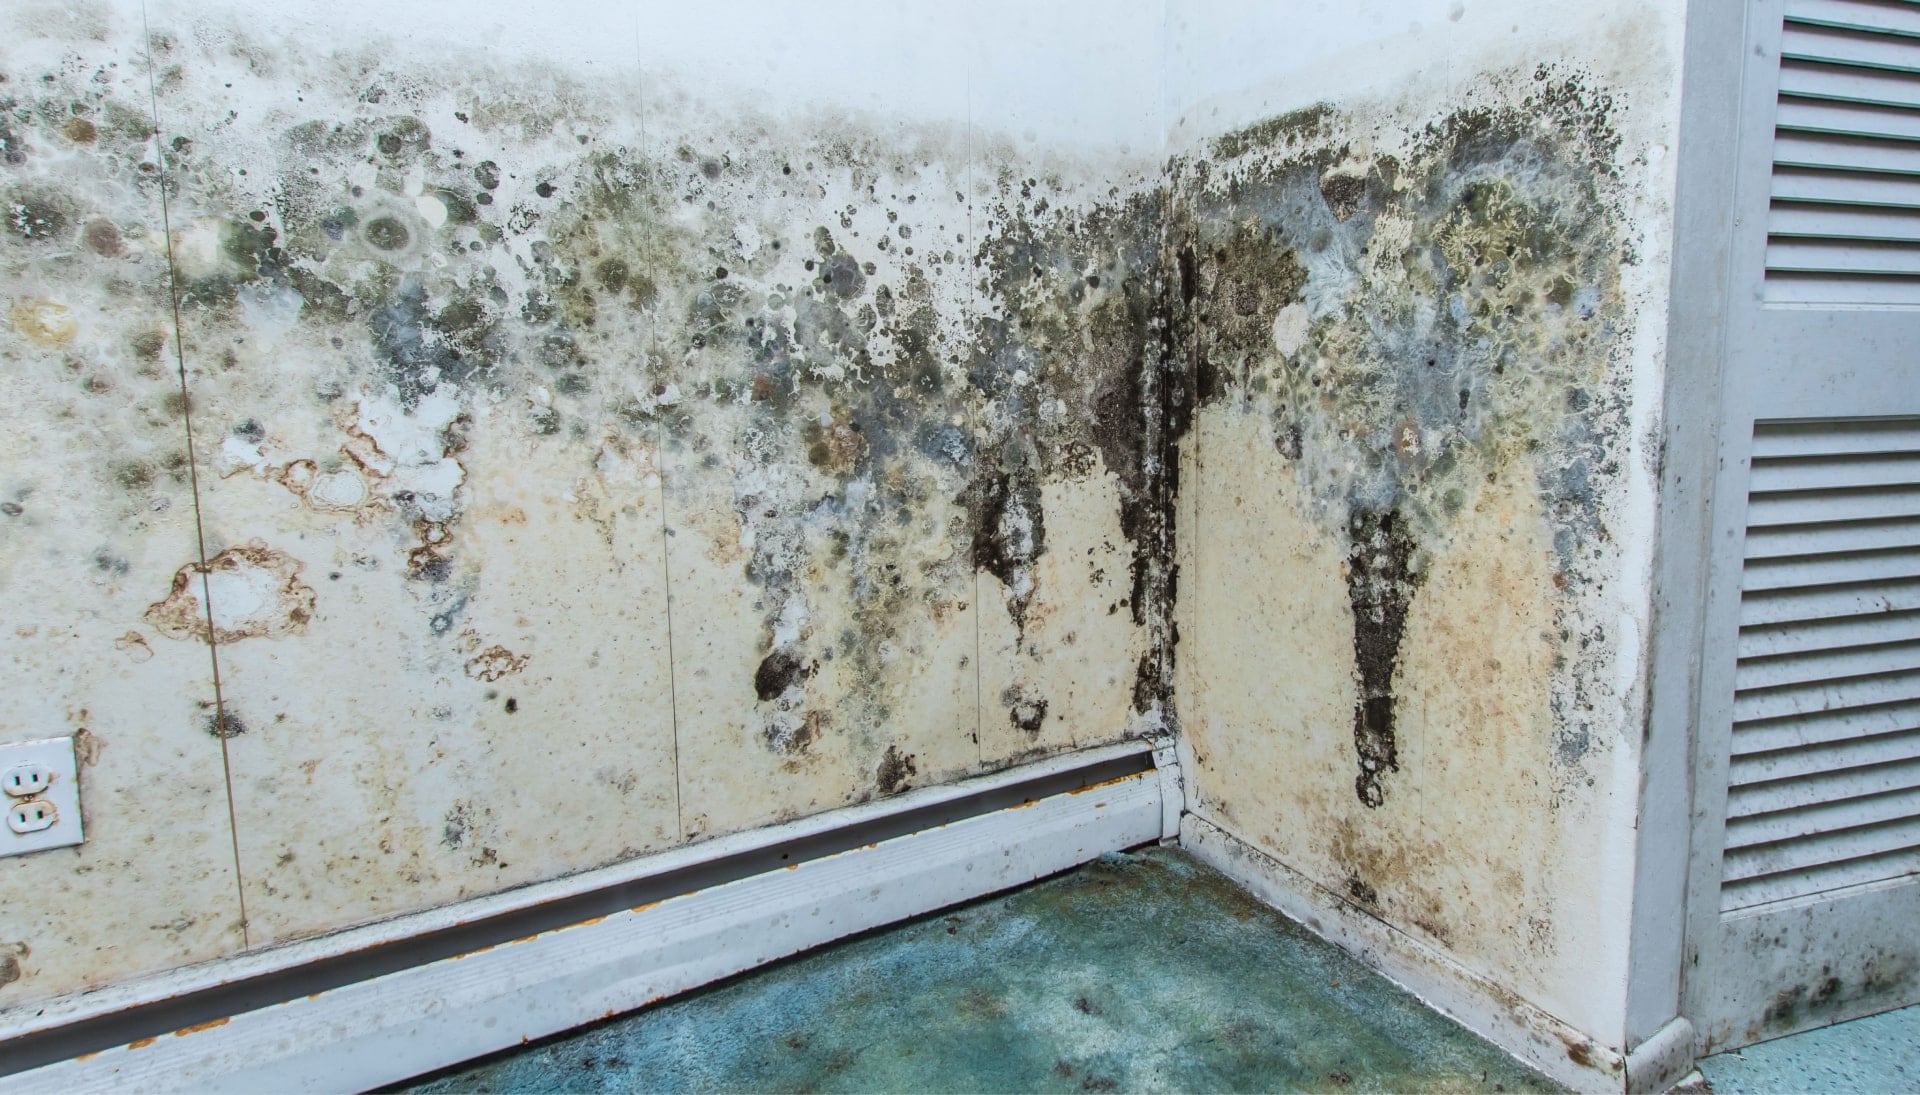 Professional mold removal, odor control, and water damage restoration service in Boston, Massachusetts.